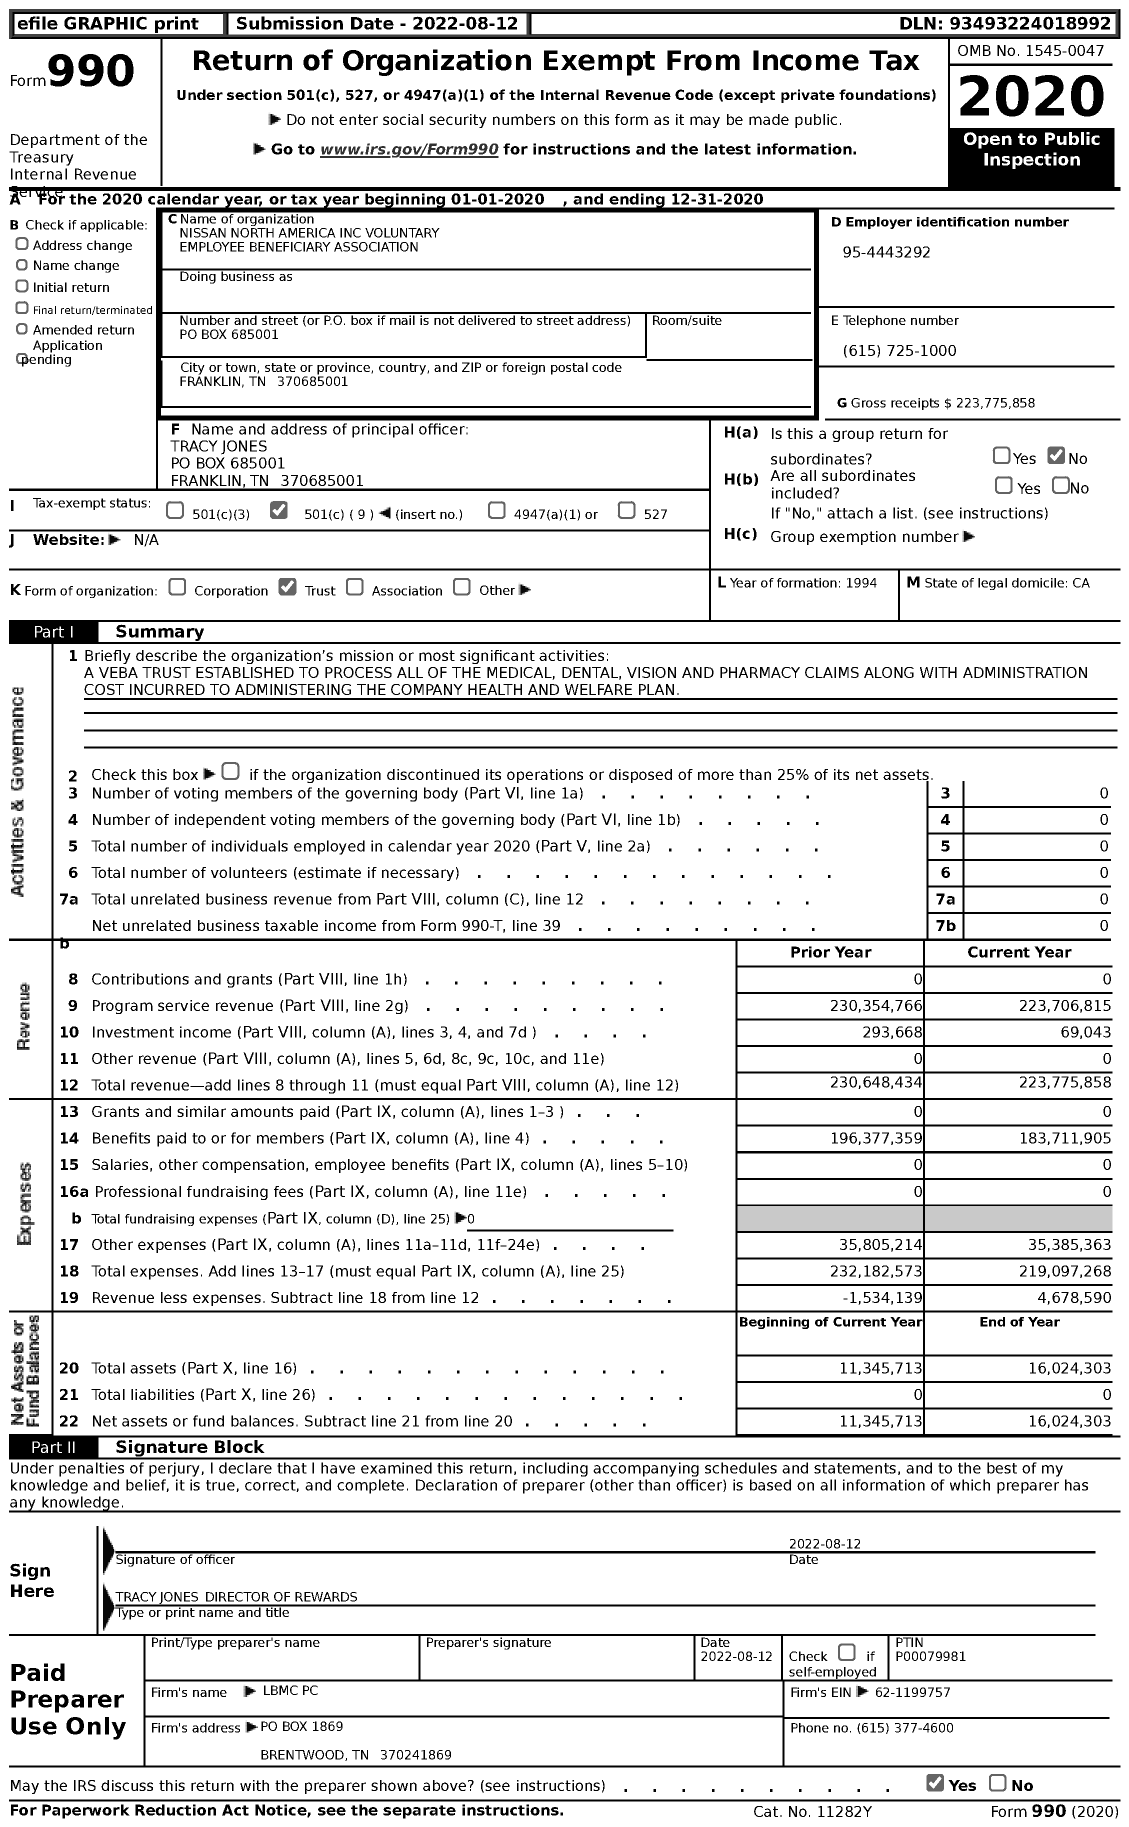 Image of first page of 2020 Form 990 for Nissan North America Voluntary Employee Beneficiary Association